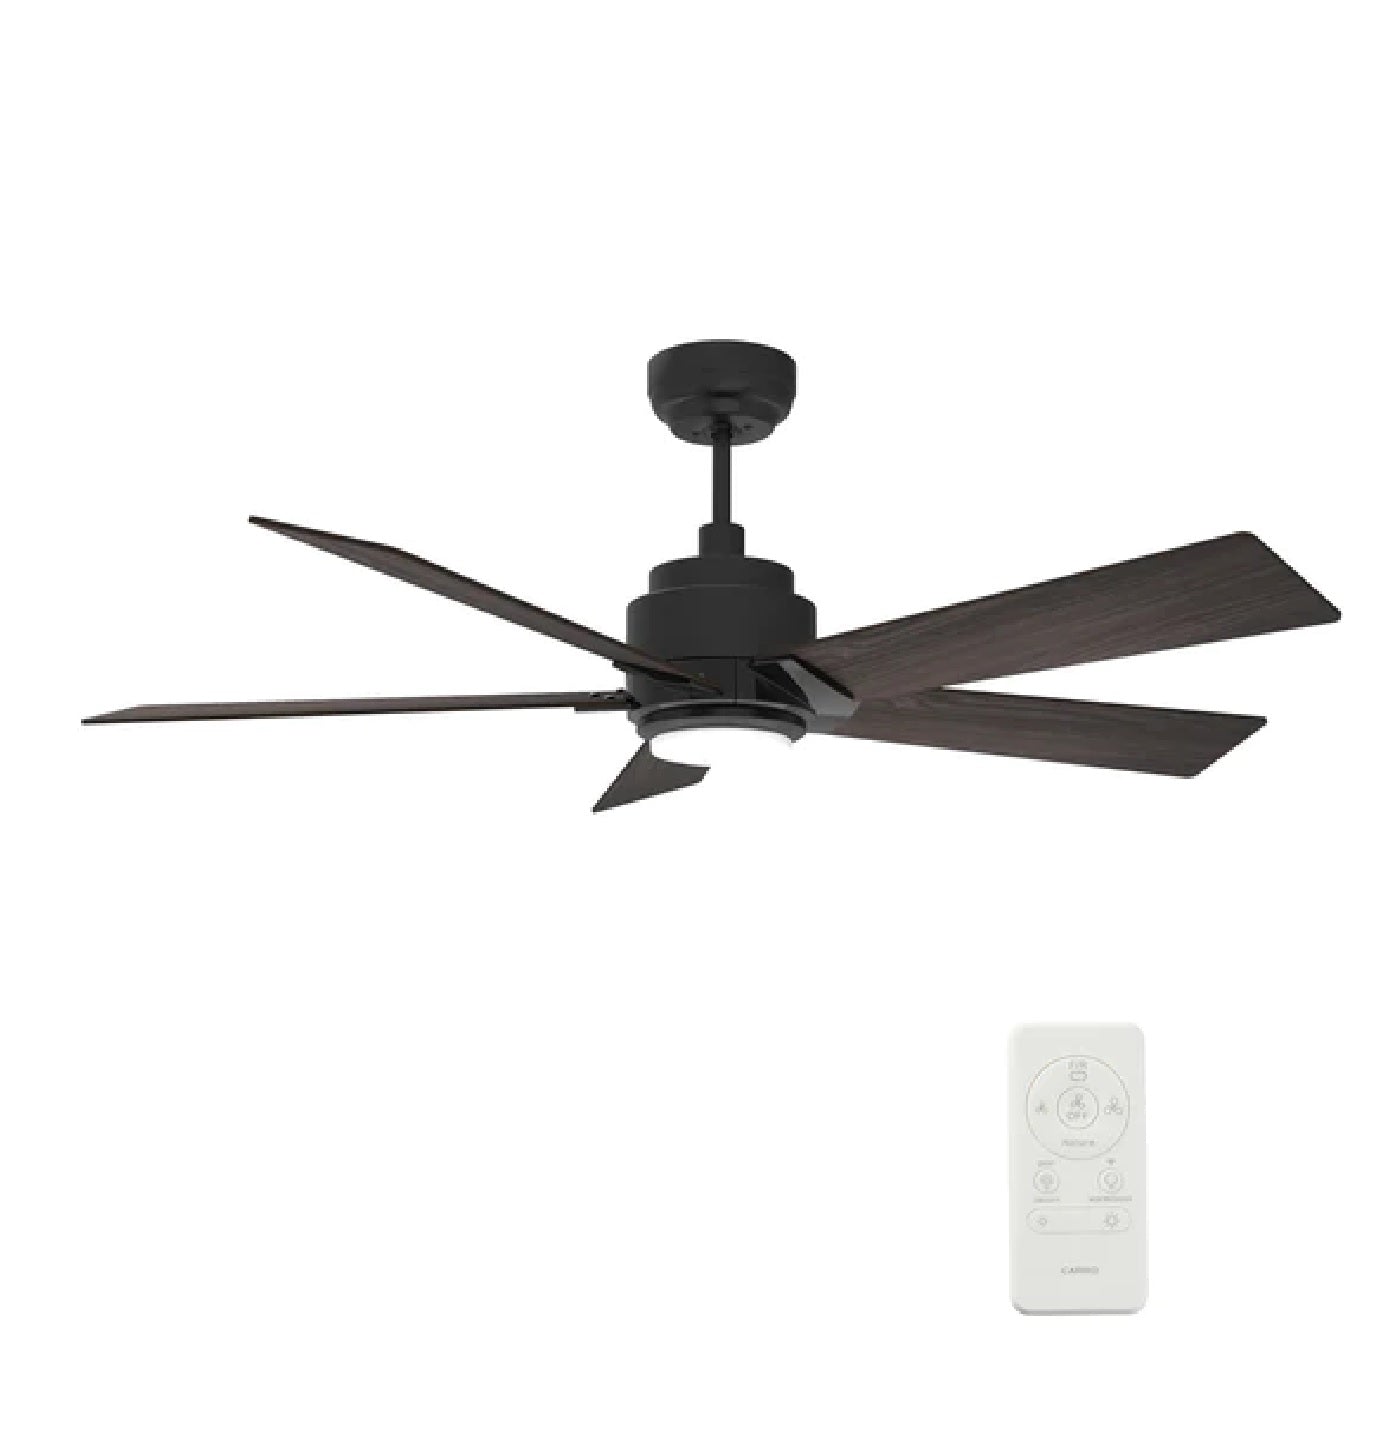 Carro - ESPEAR 52 inch 5-Blade Smart Ceiling Fan with LED Light Kit & Remote